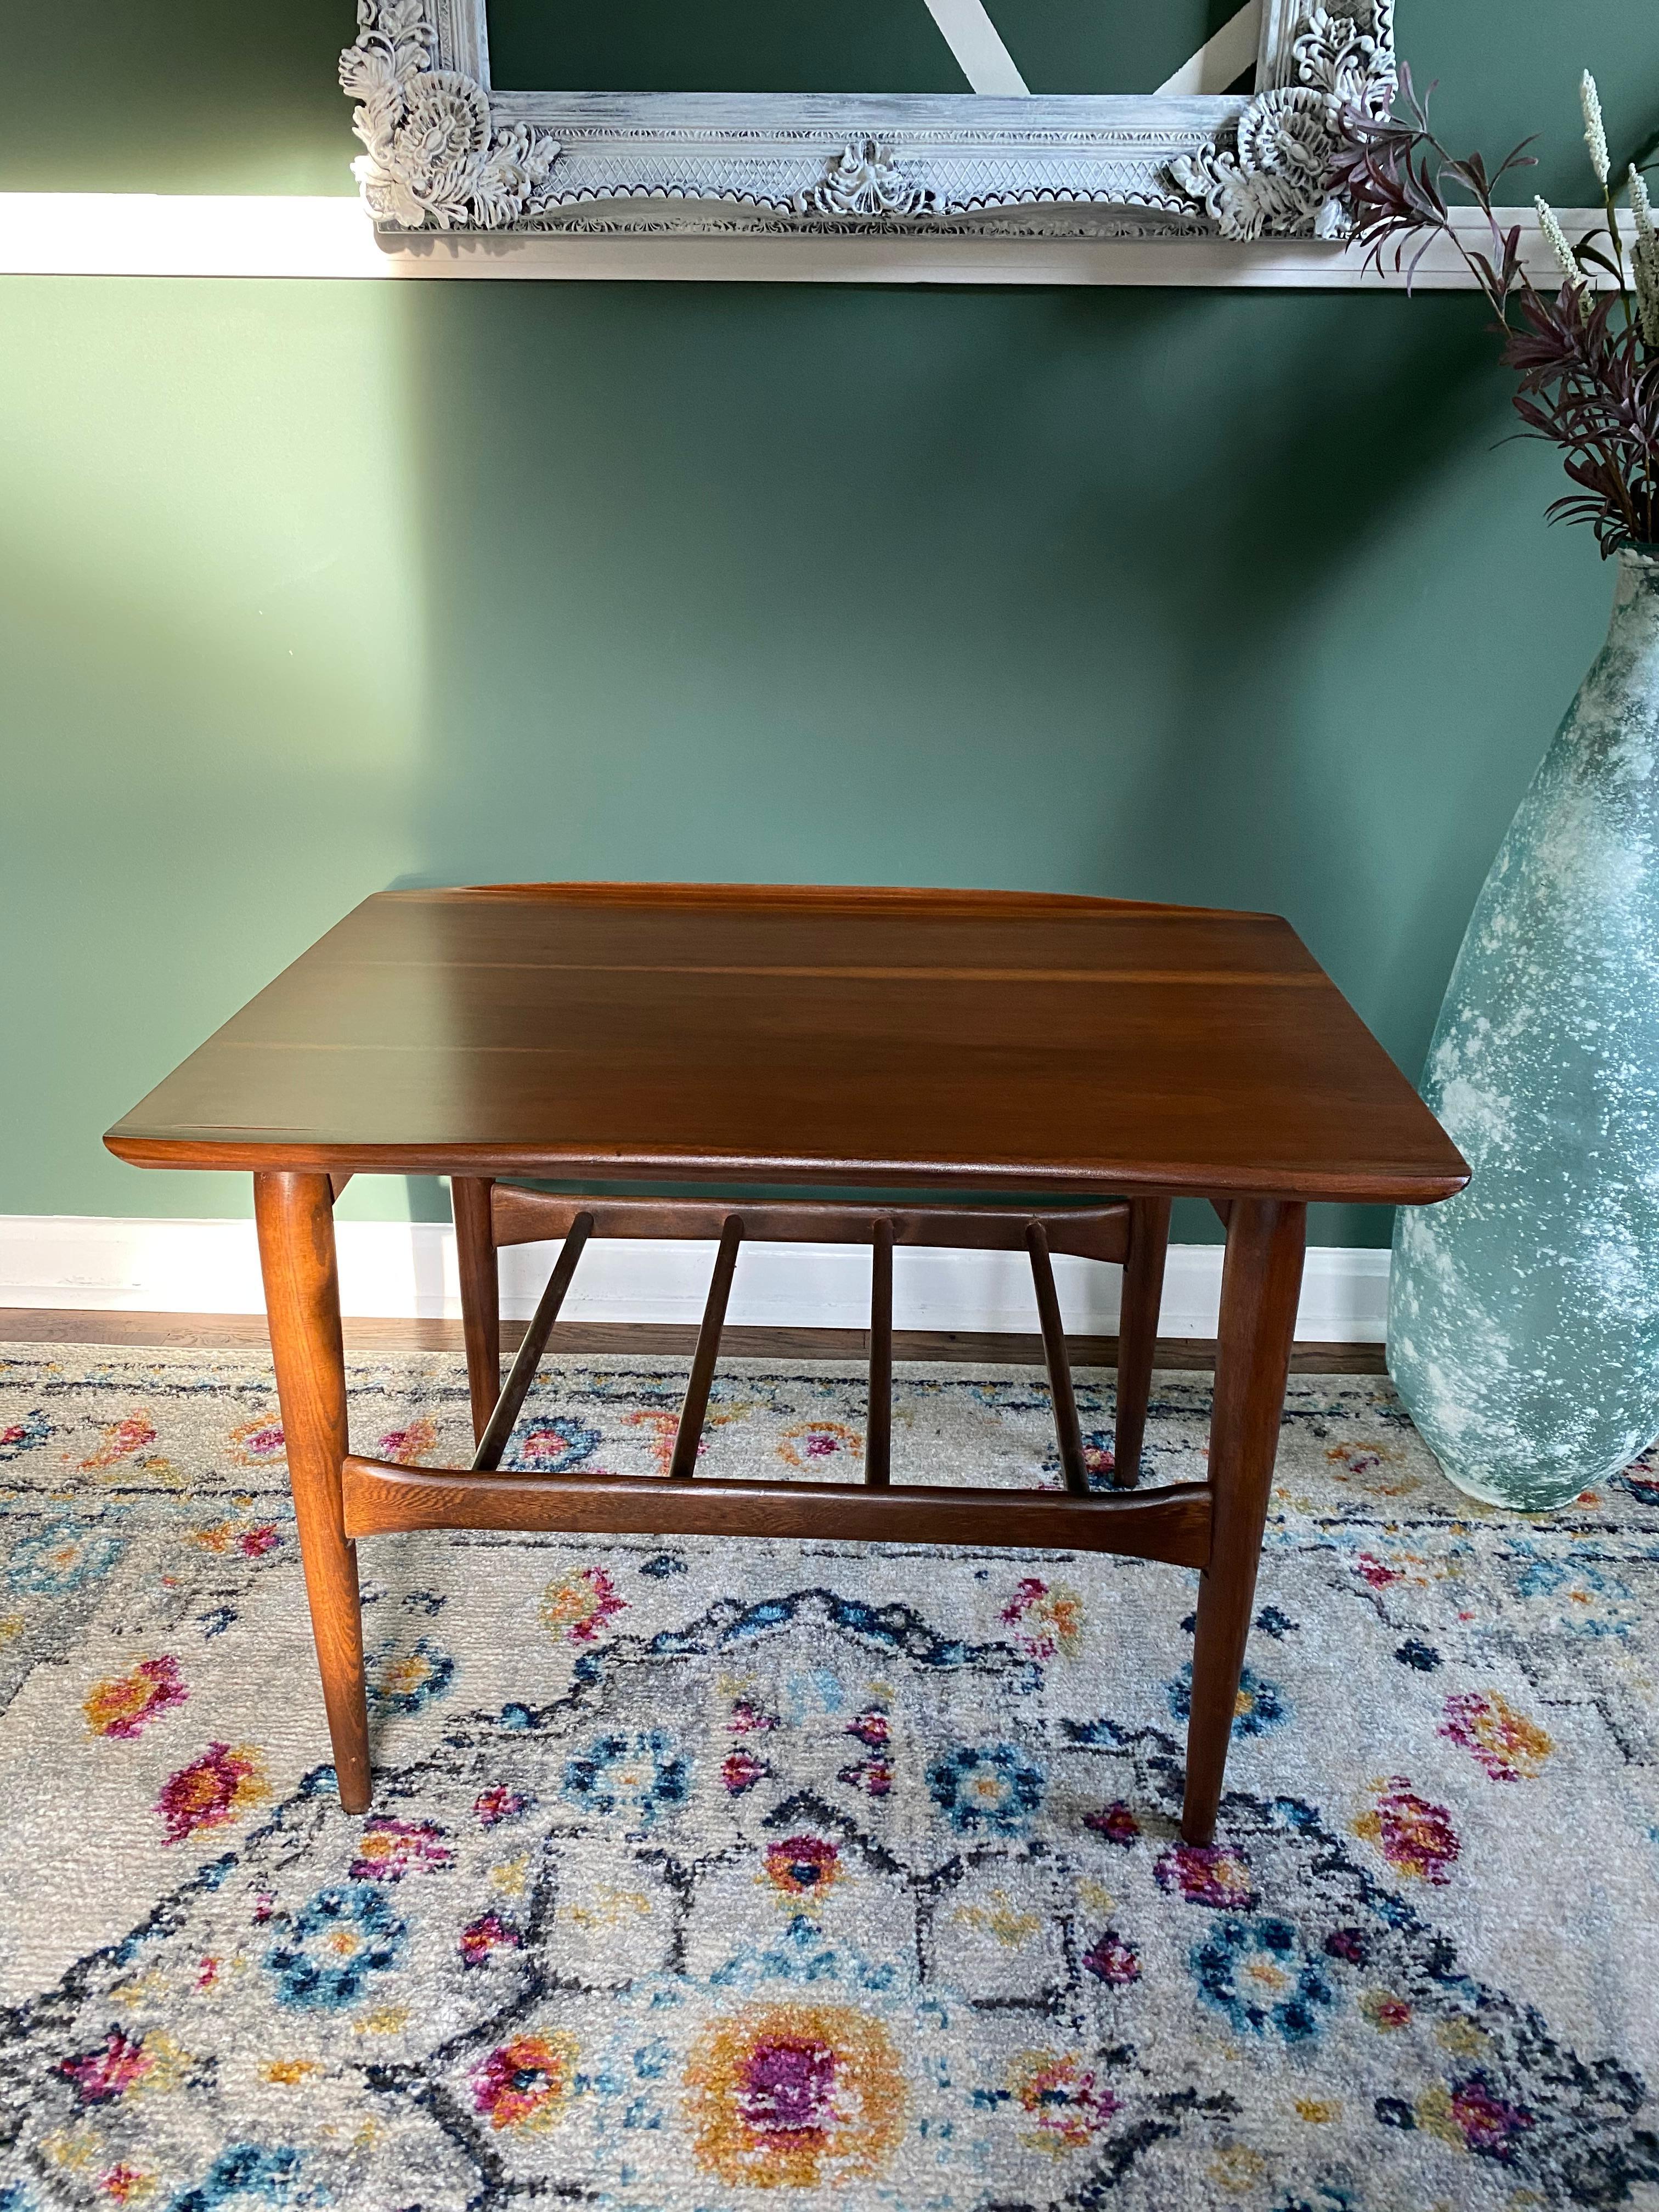 Refinished Mid-Century Modern Danish End Table with Lip by Bassett In Good Condition For Sale In Medina, OH